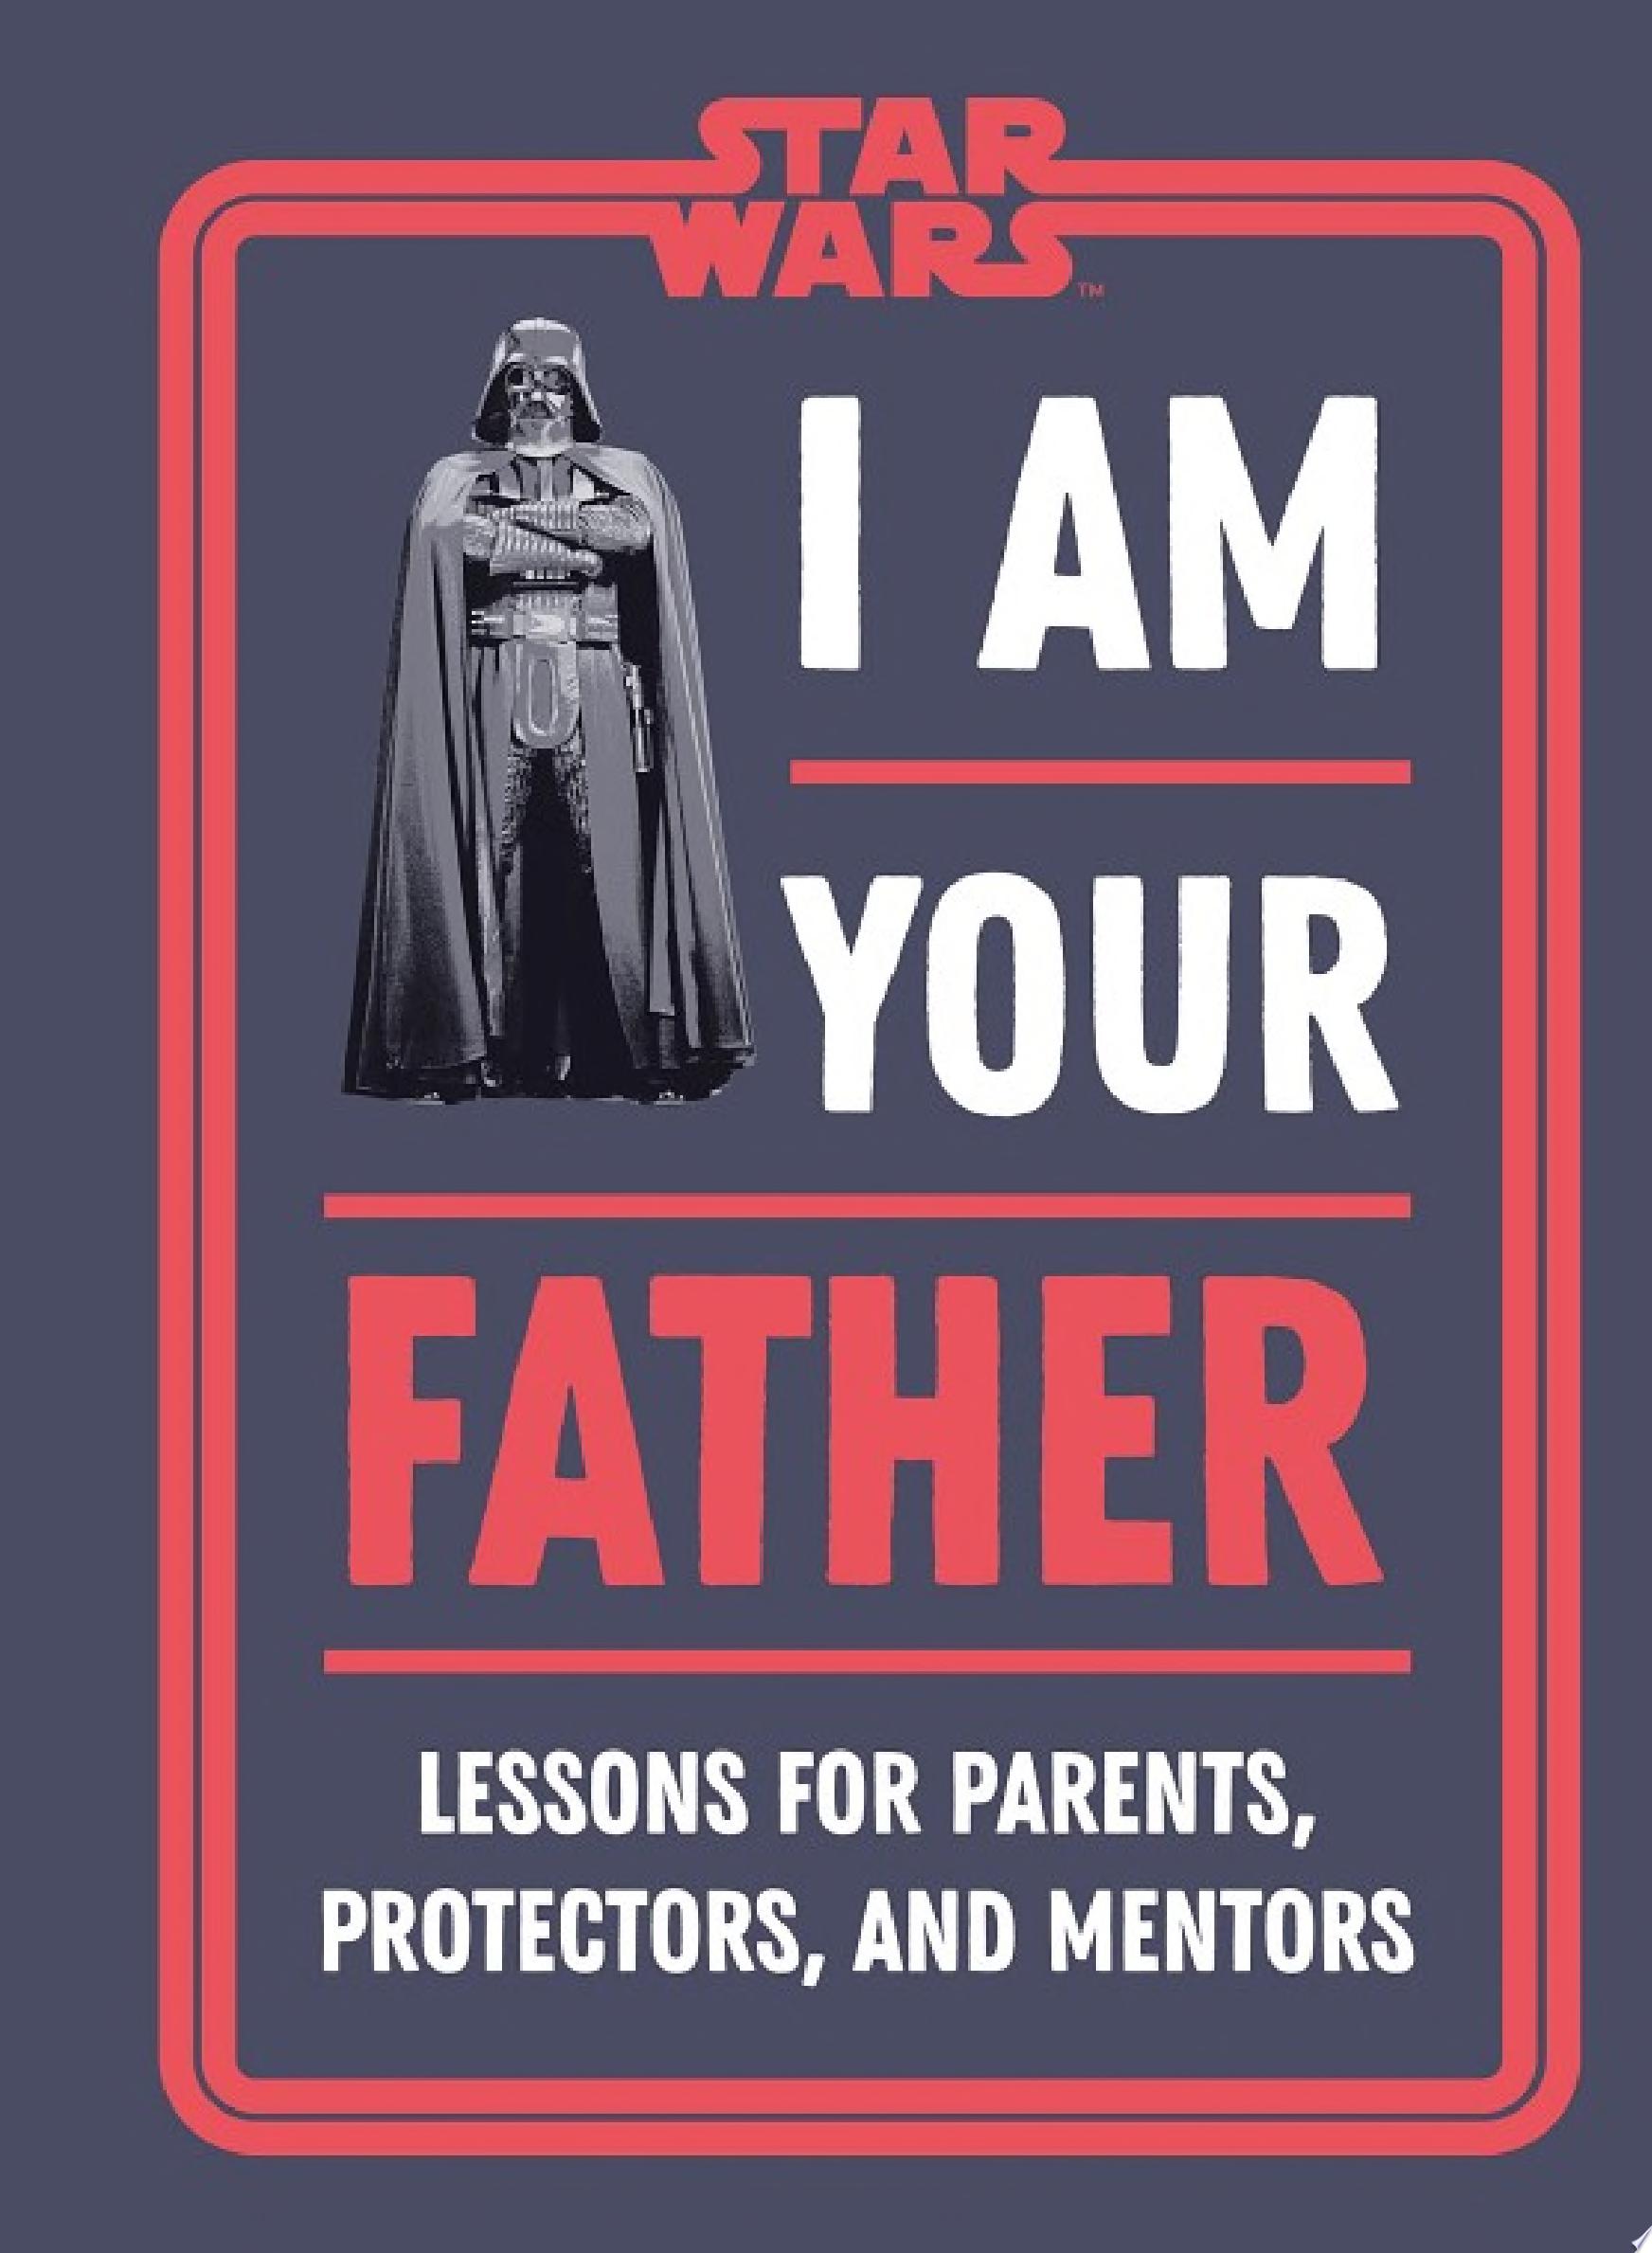 Image for "Star Wars I Am Your Father"